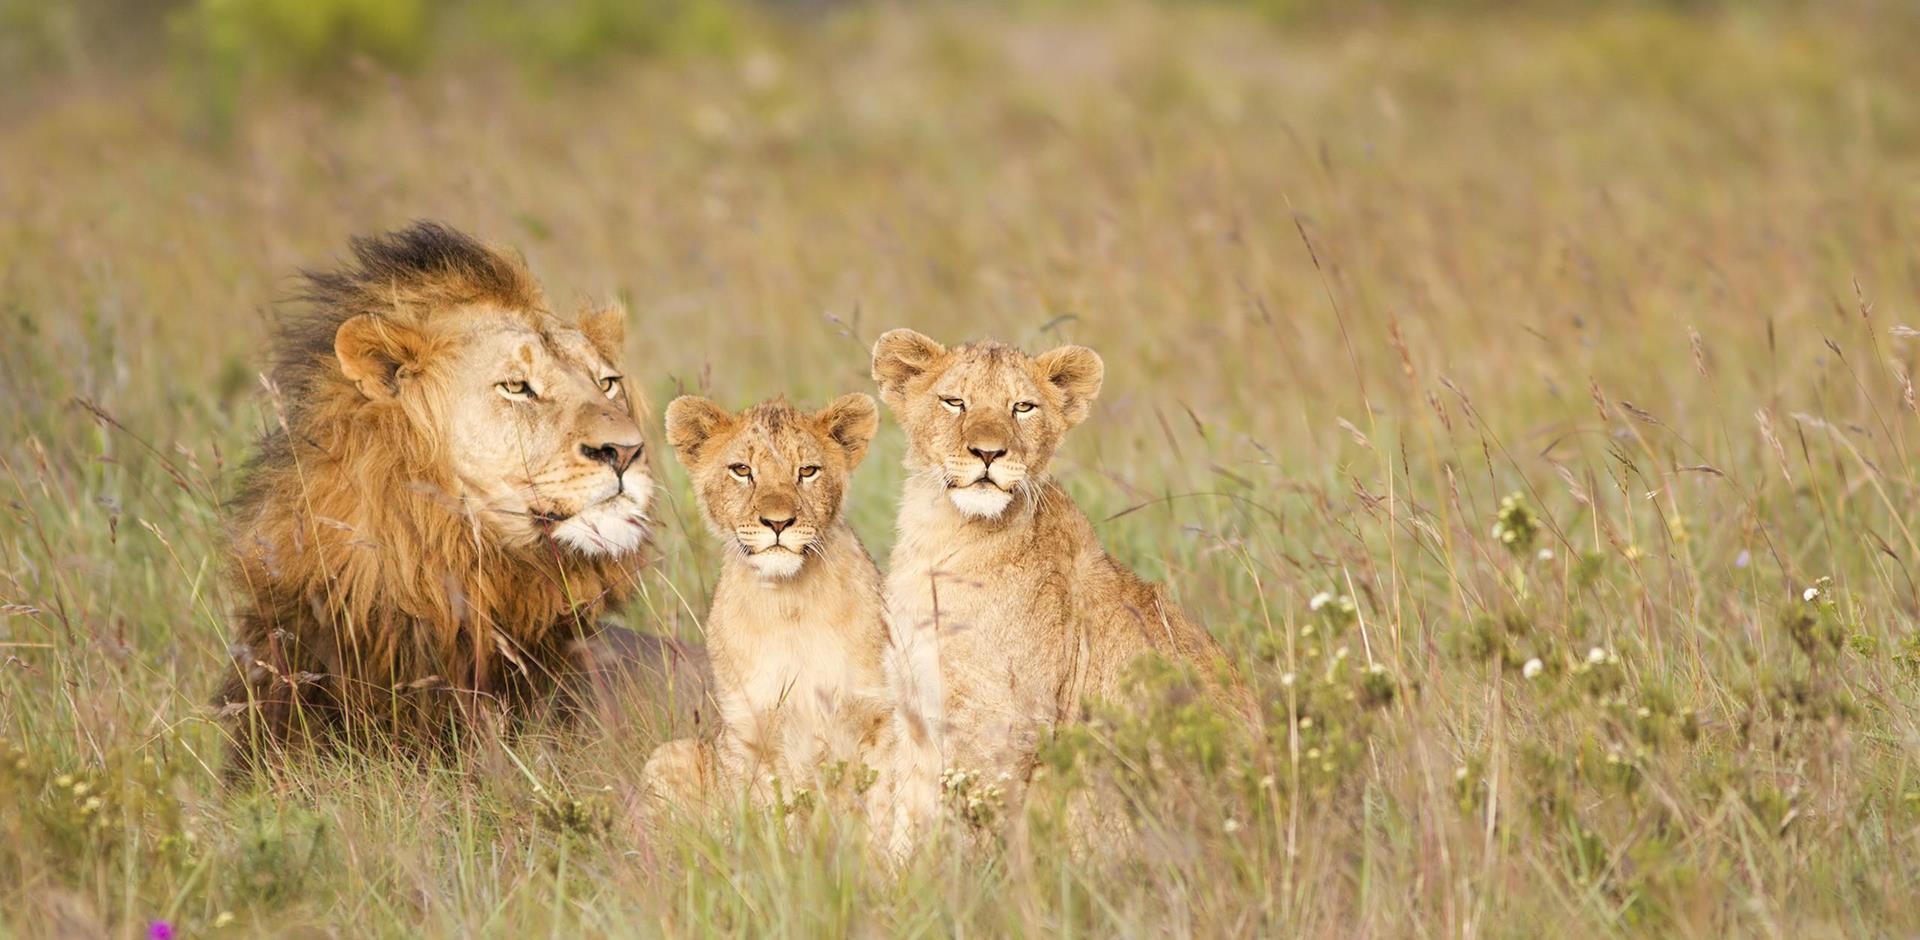 Lion and Cubs, South Africa